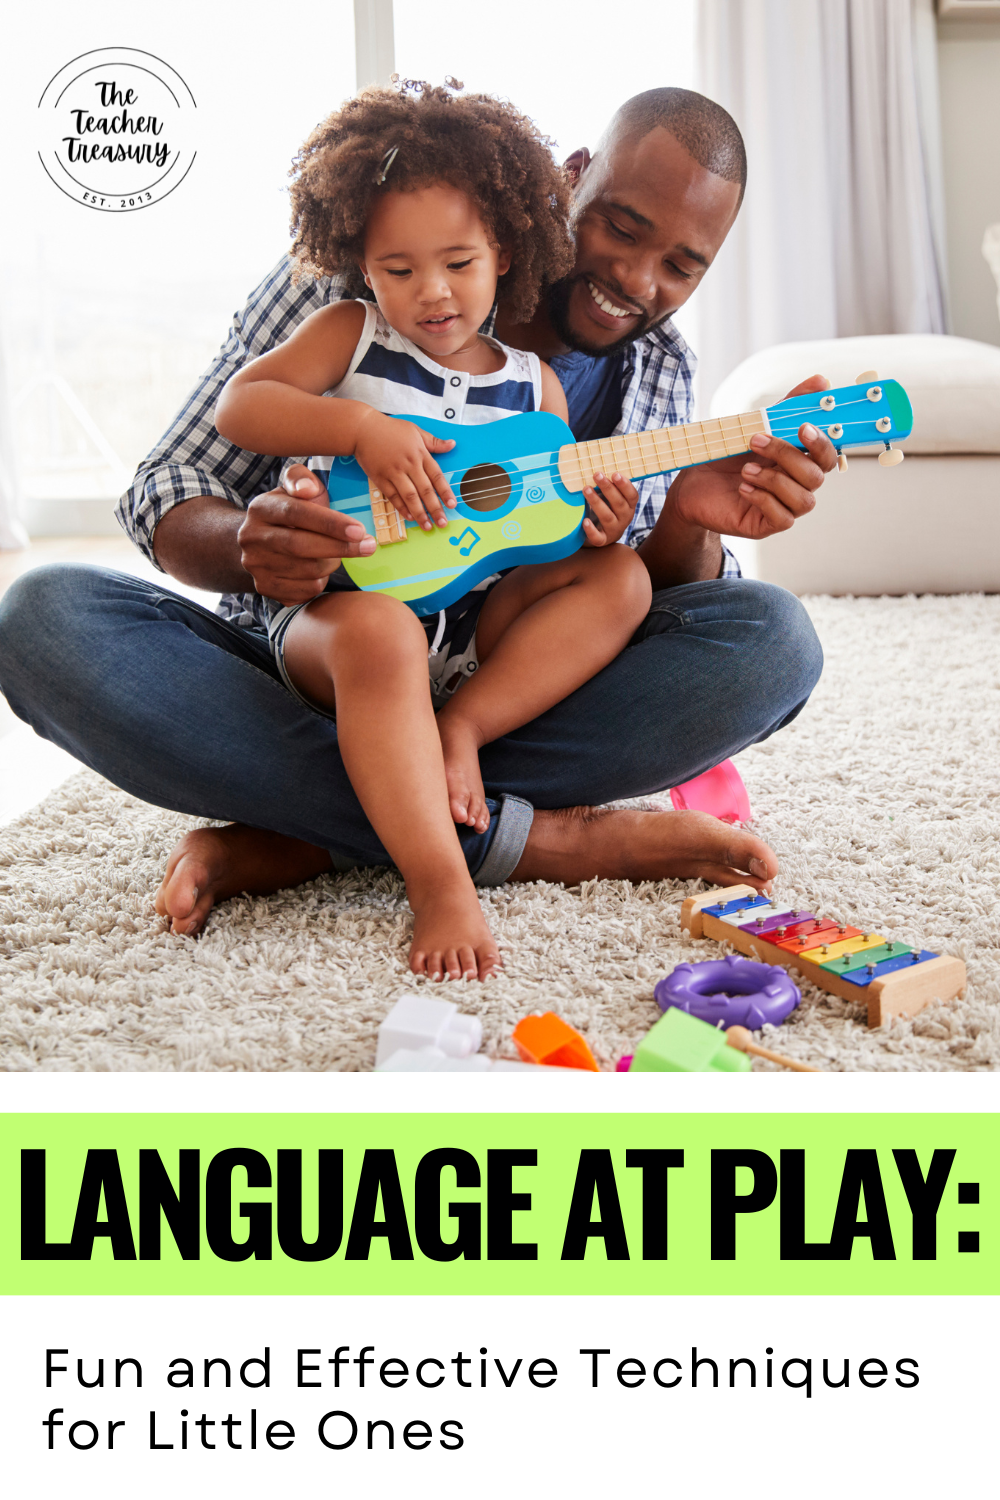 A dad smiles while holding his daughter strumming a guitar, creating a musical playtime that fosters language development through song and rhythm.